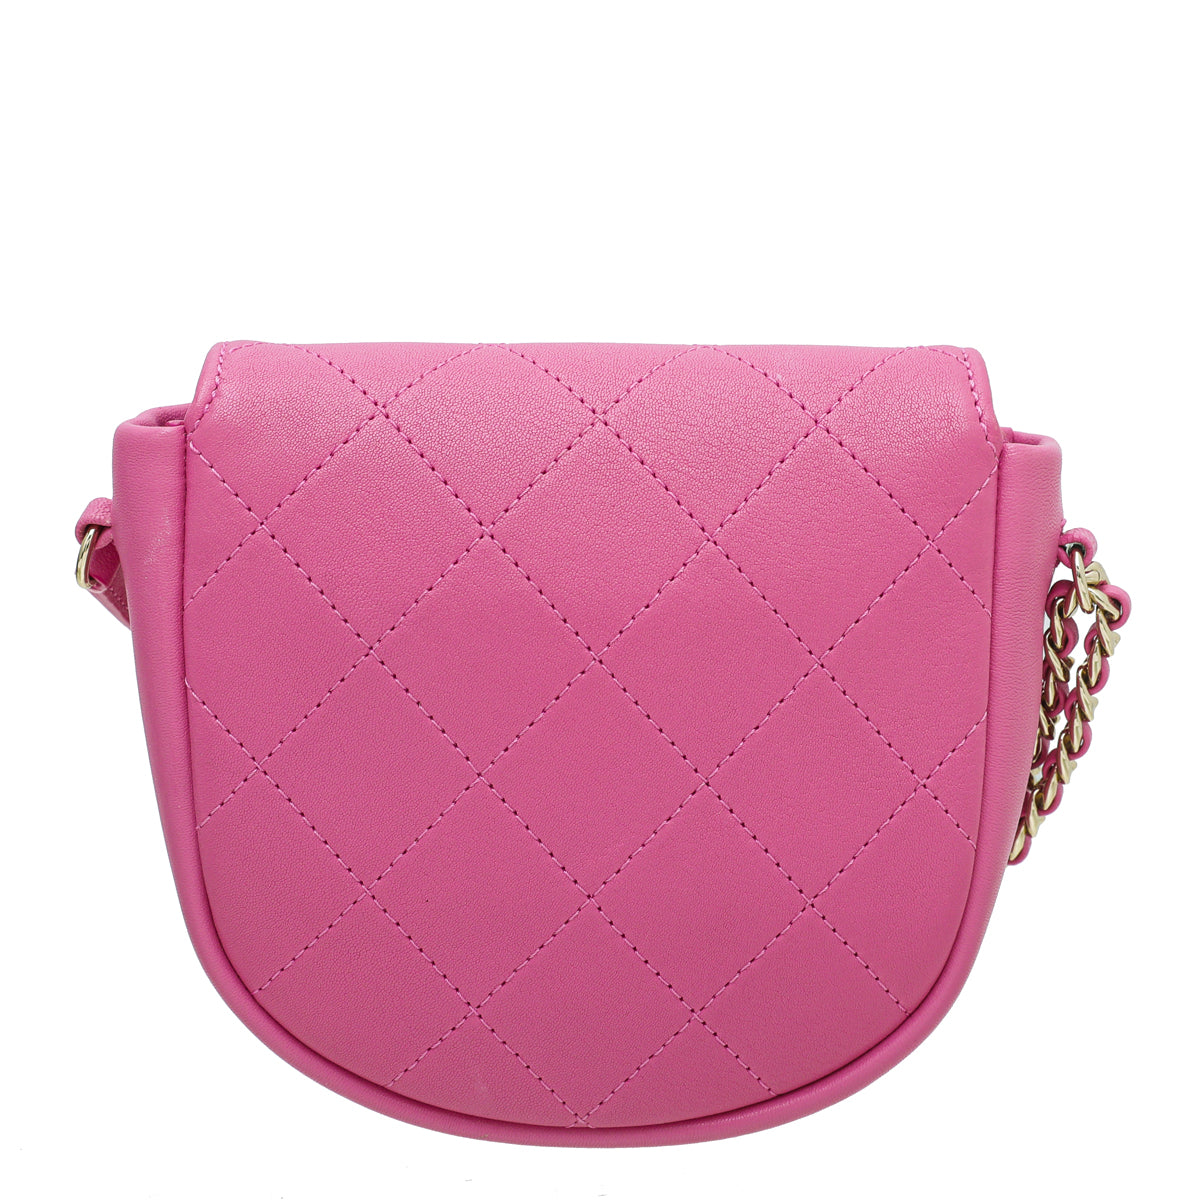 Chanel Triple CC Small Pink Leather Bag Preowned